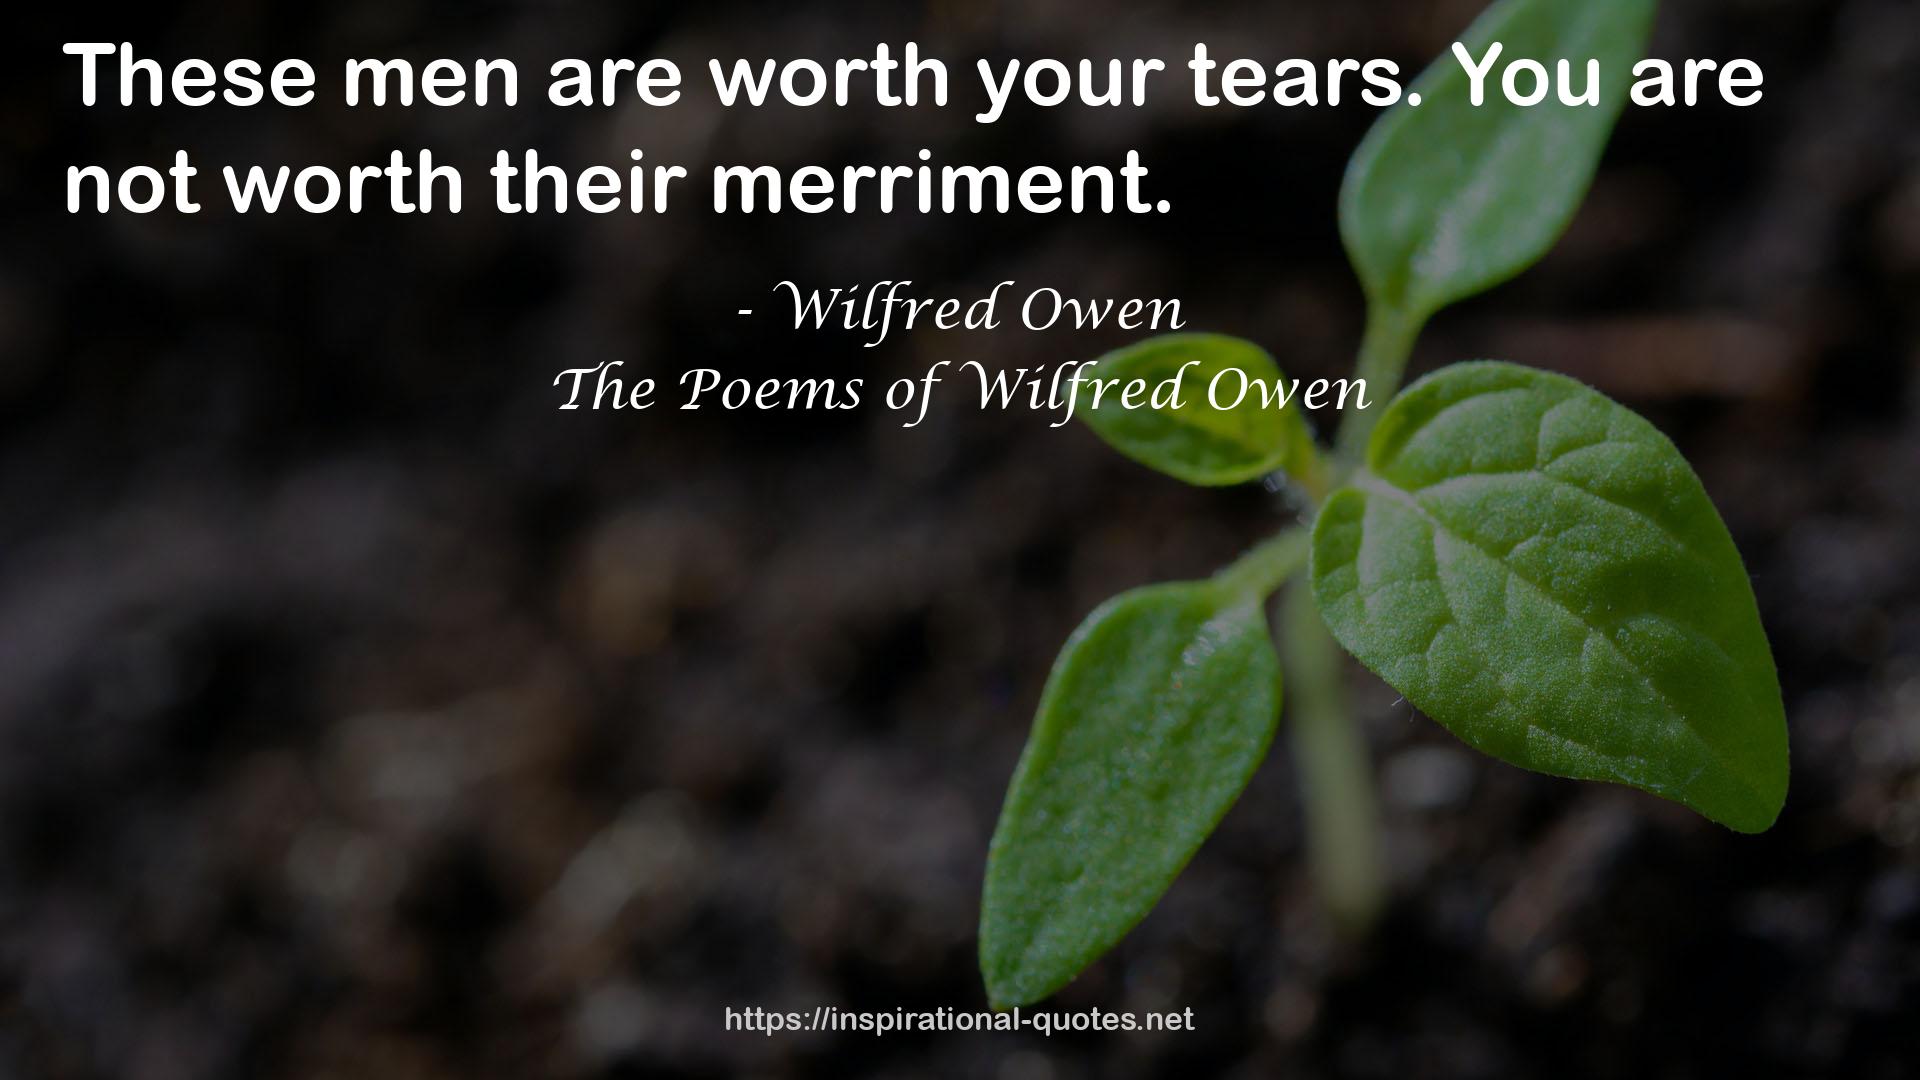 The Poems of Wilfred Owen QUOTES